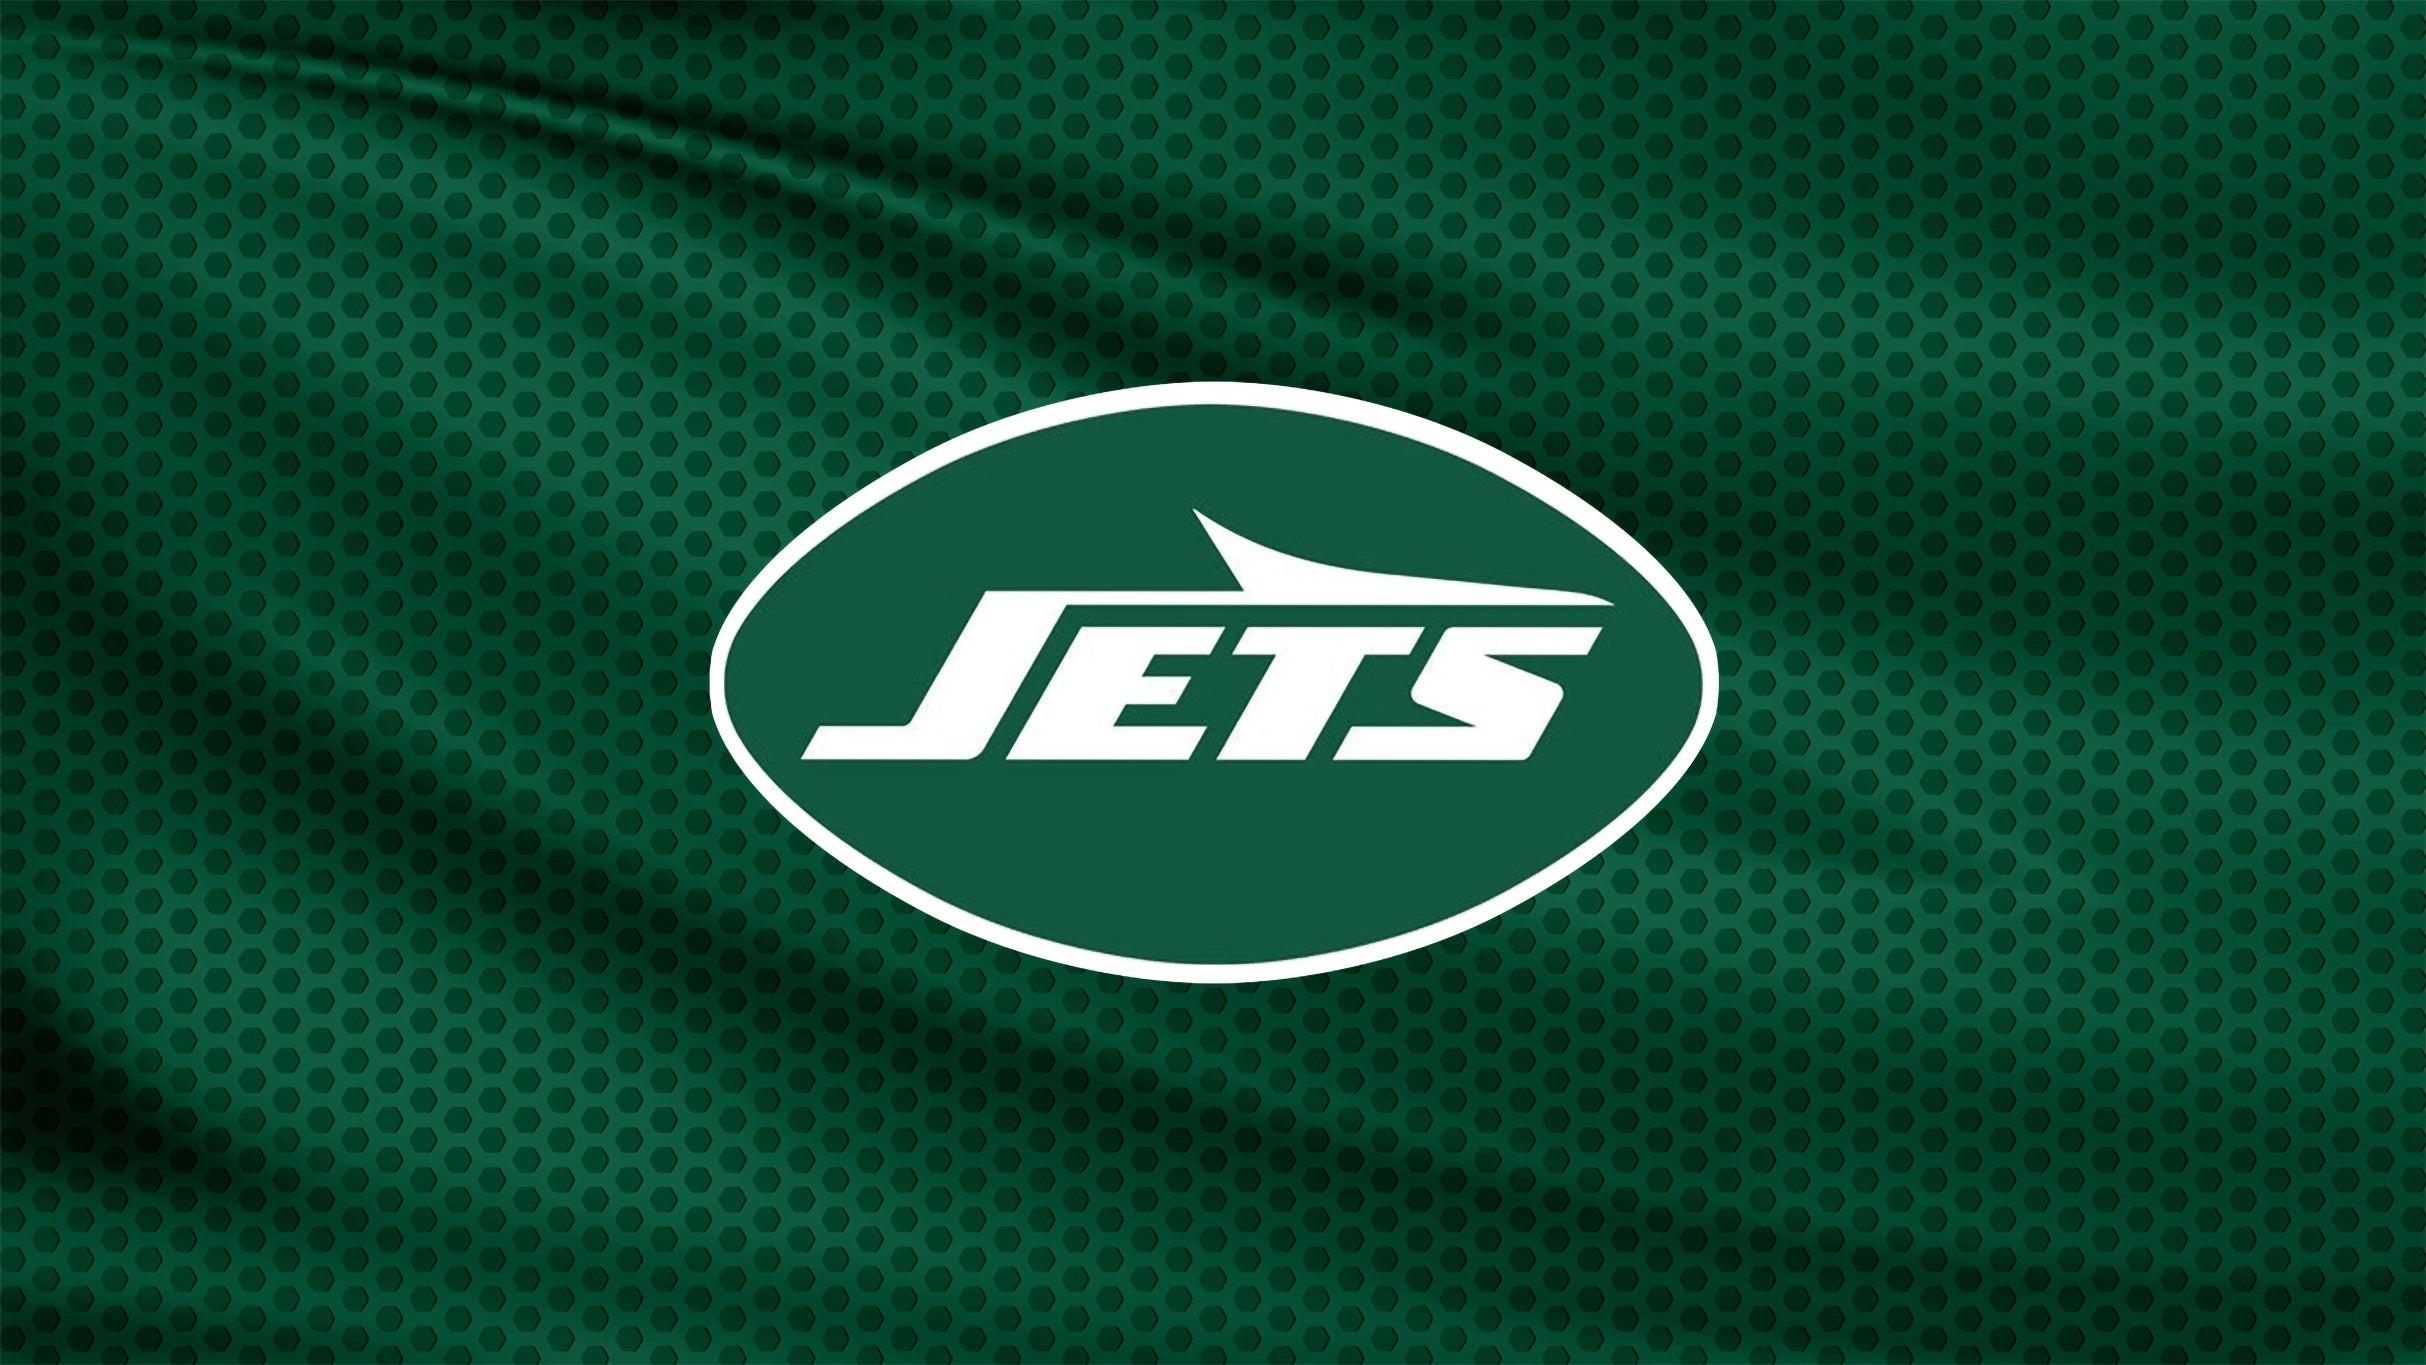 New York Jets vs. Los Angeles Rams in East Rutherford promo photo for VISA presale offer code